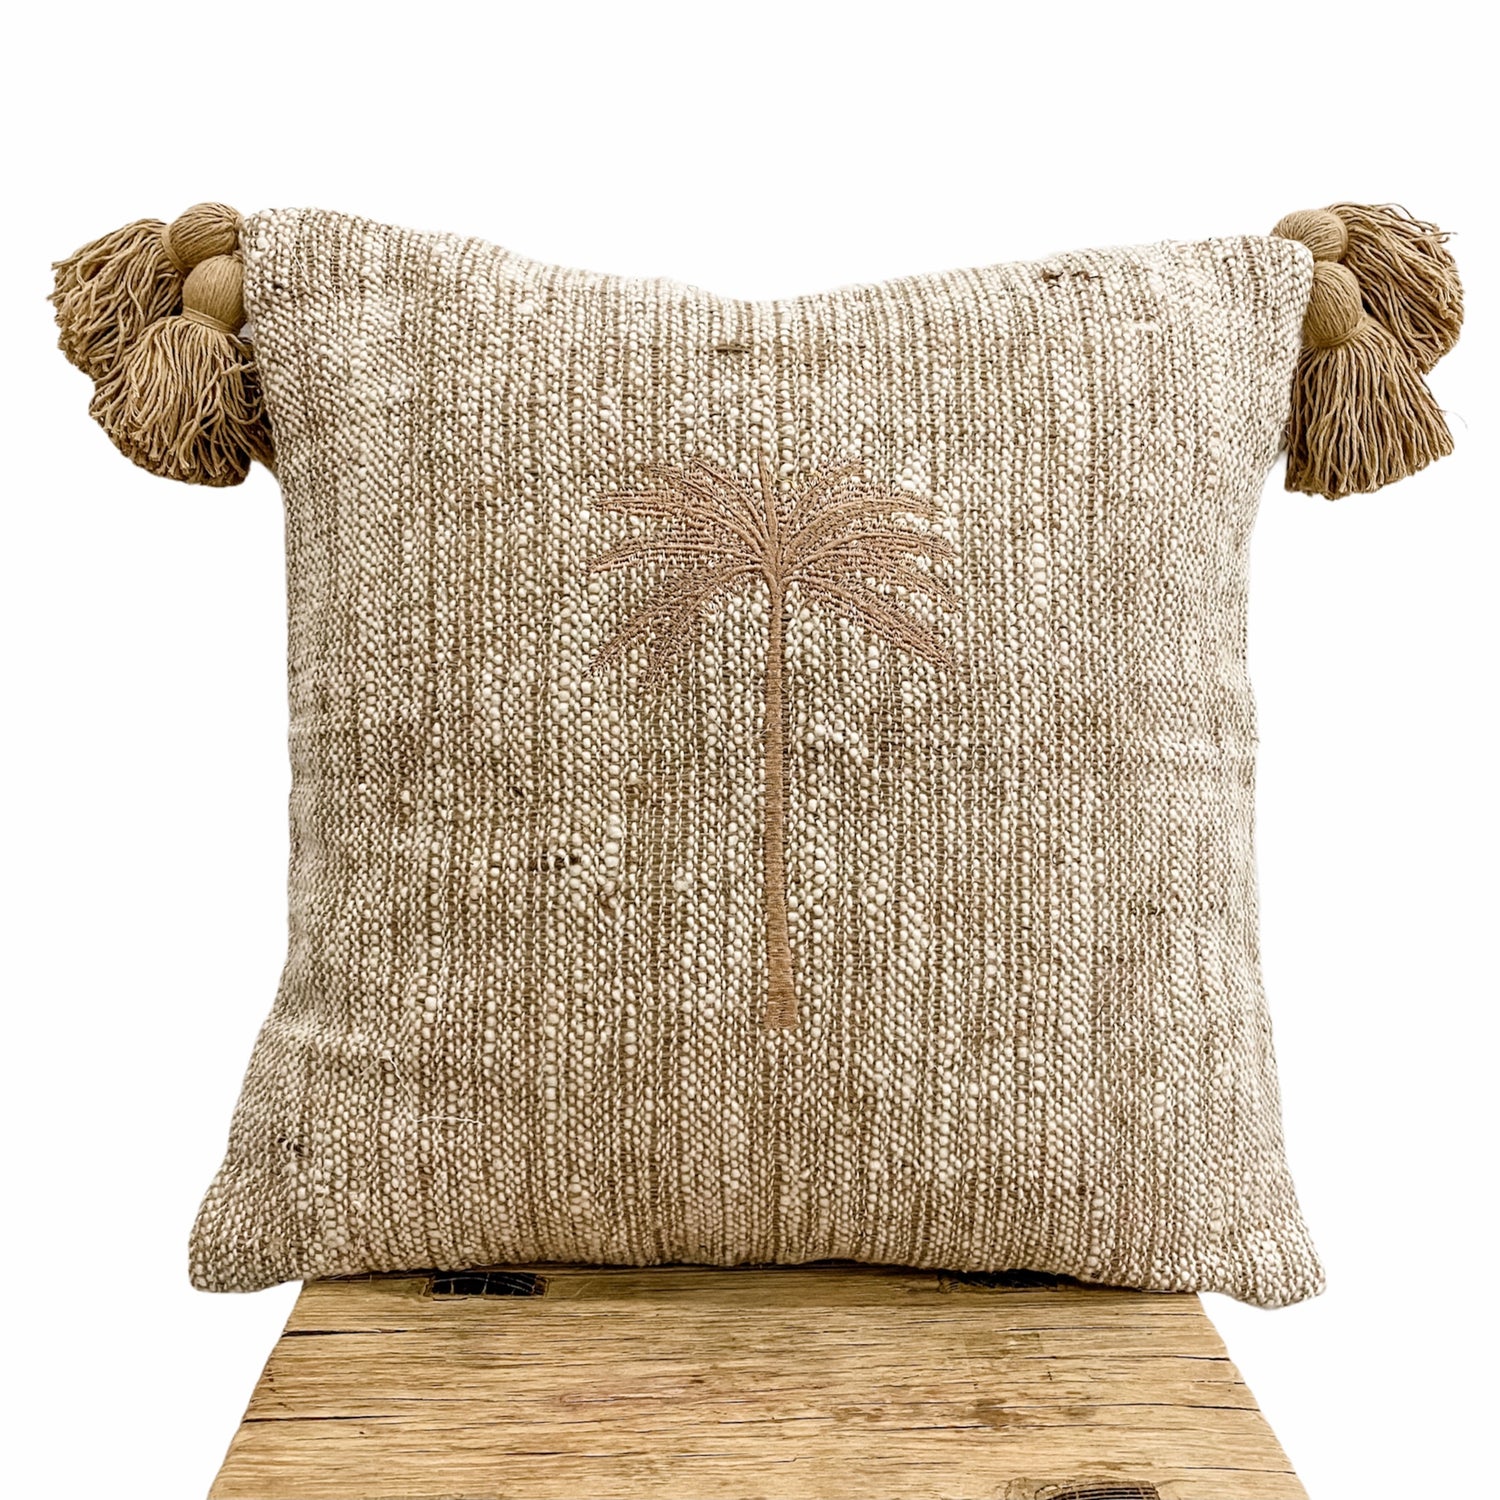 Husk Cushion featuring tassels and palm